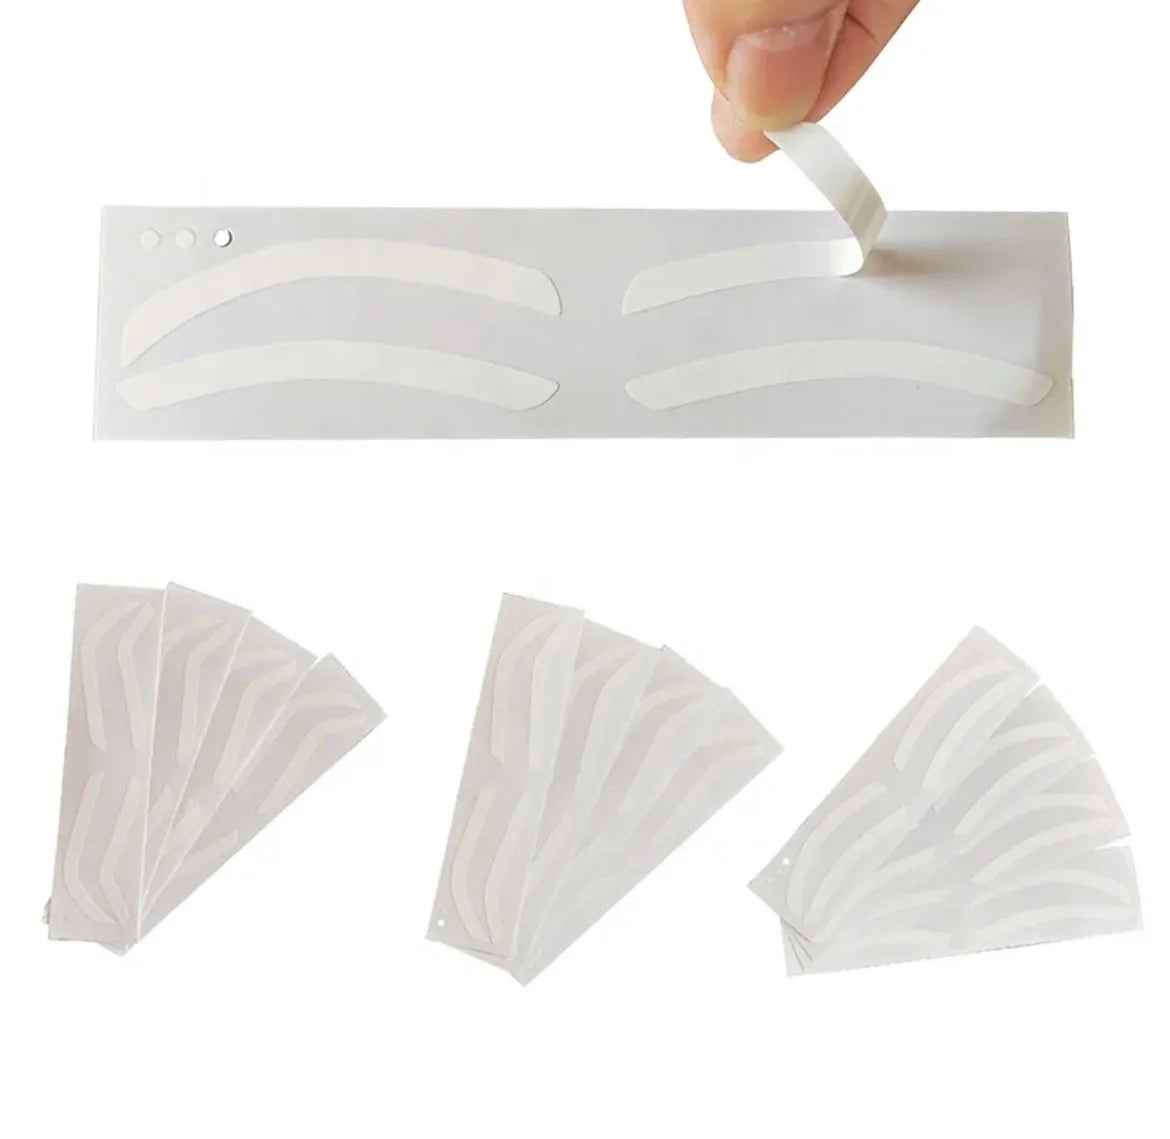 Eyebrow shape tape shaping stickers for brow tinting